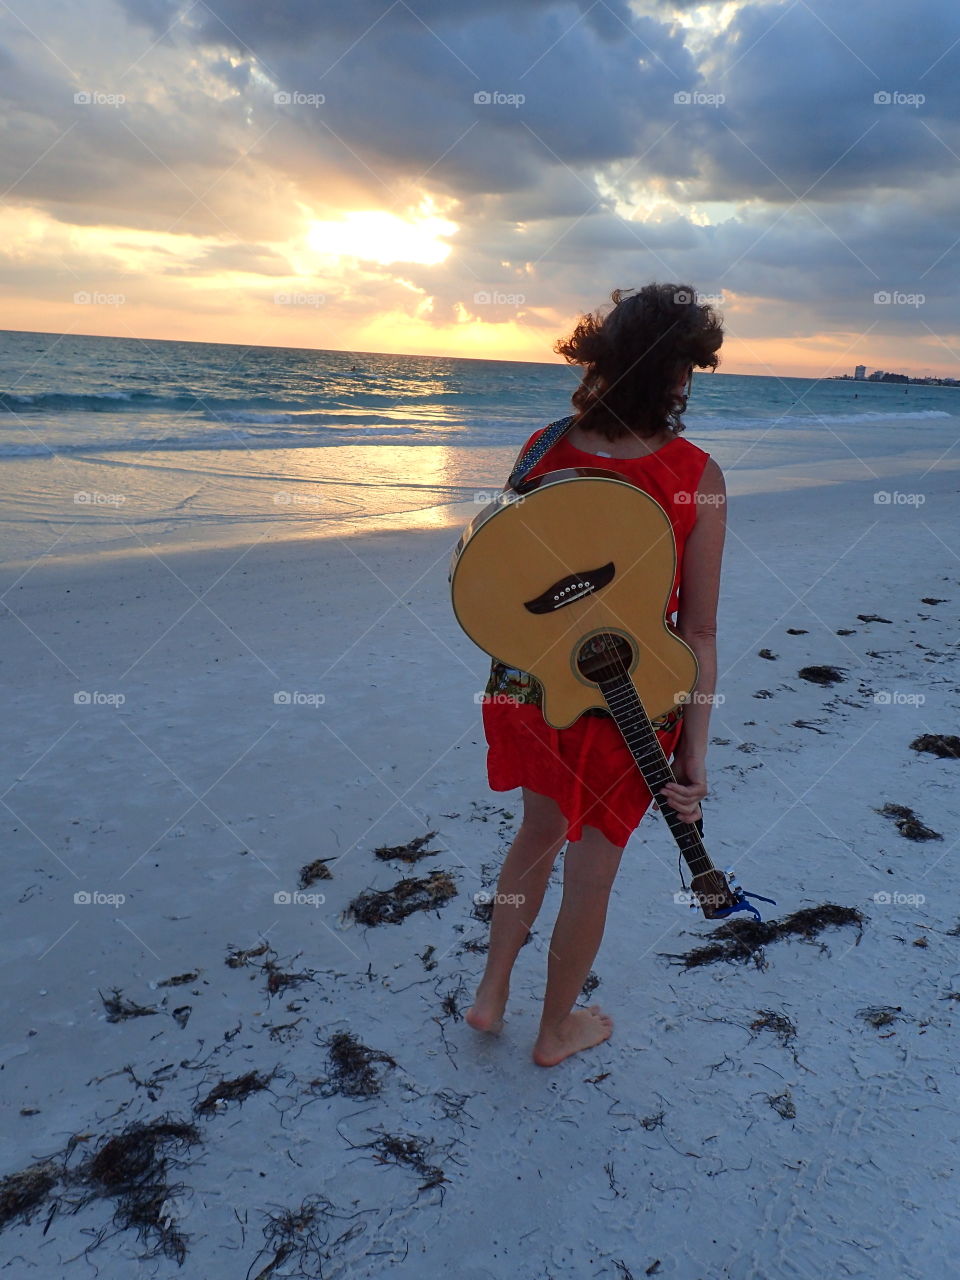 Summer sunset at the beach taking quiet stroll with guitar pondering life